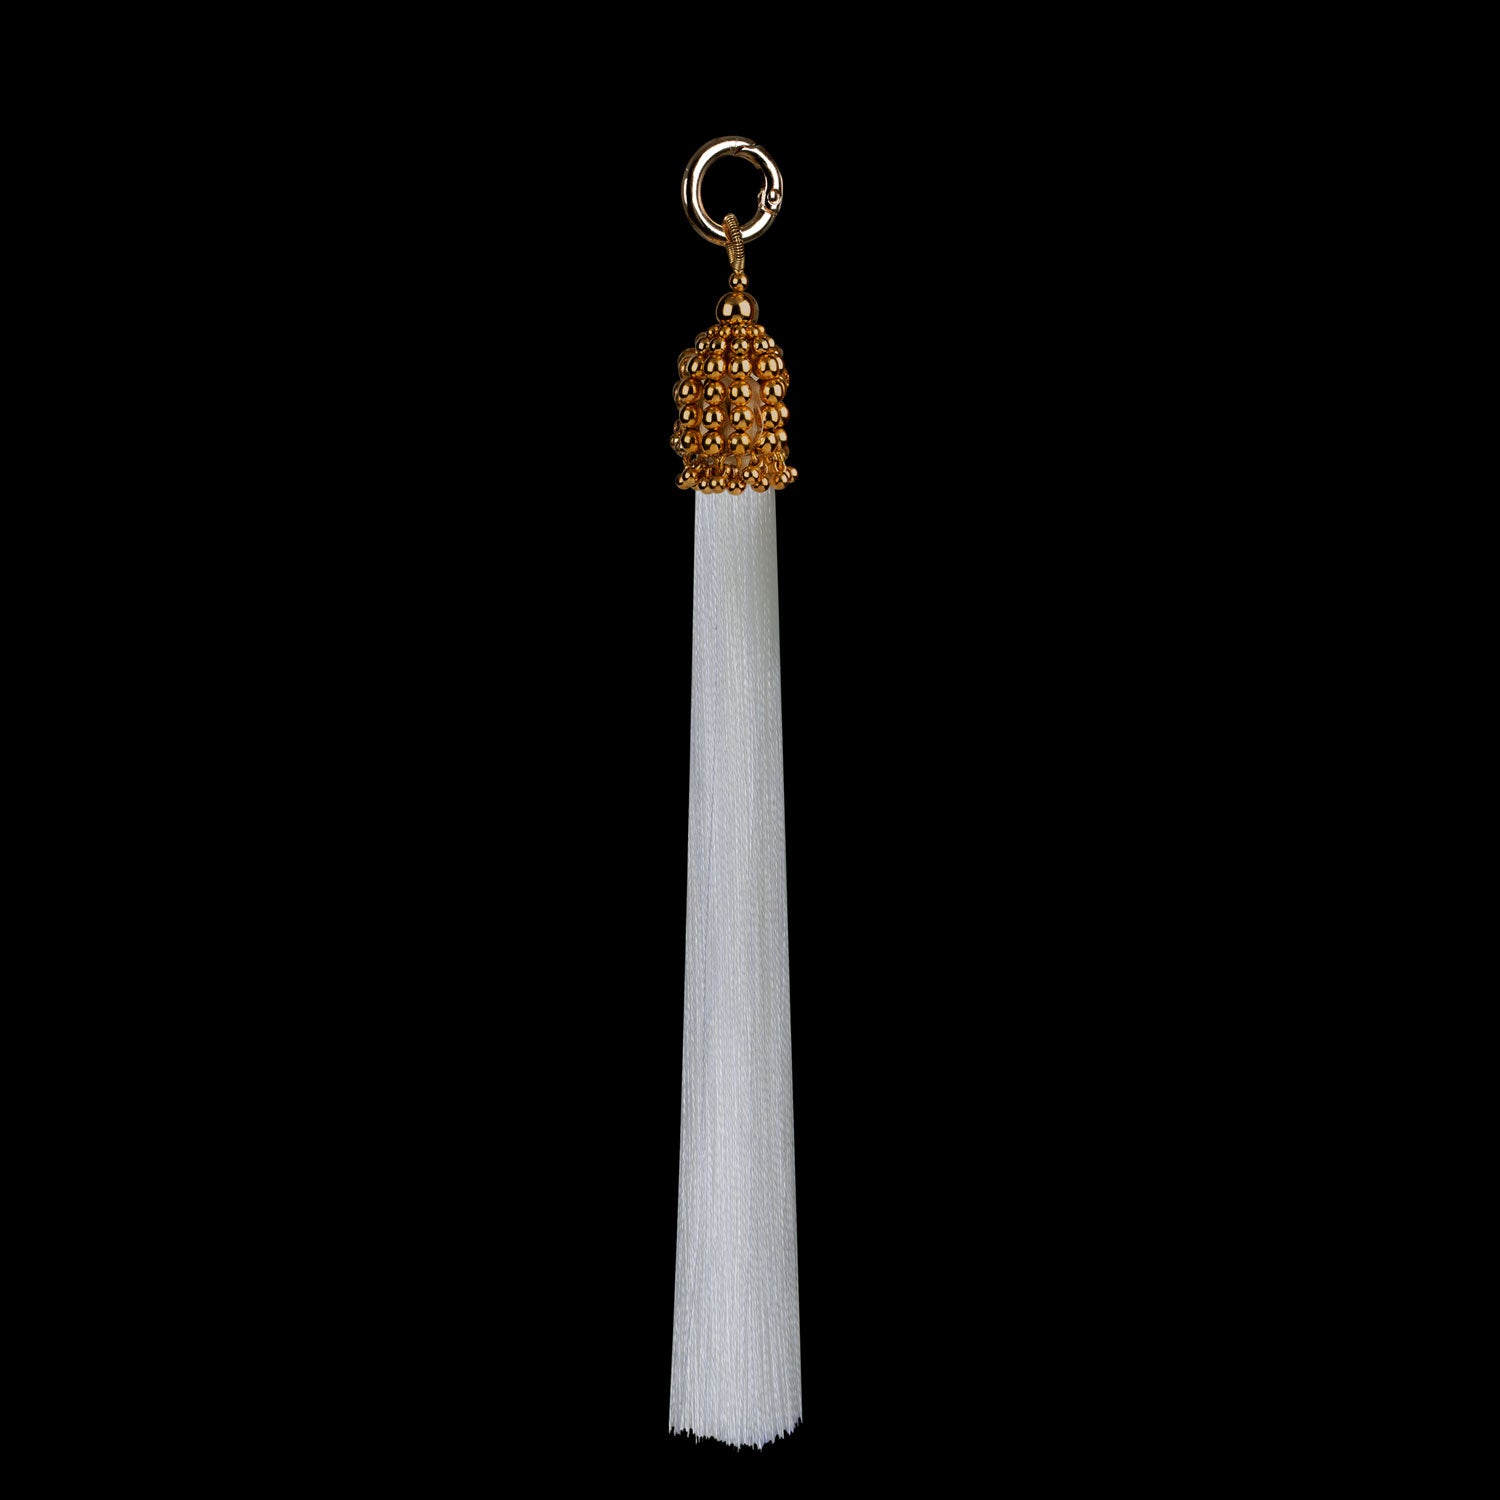 11" White Tassel with Gold Cap